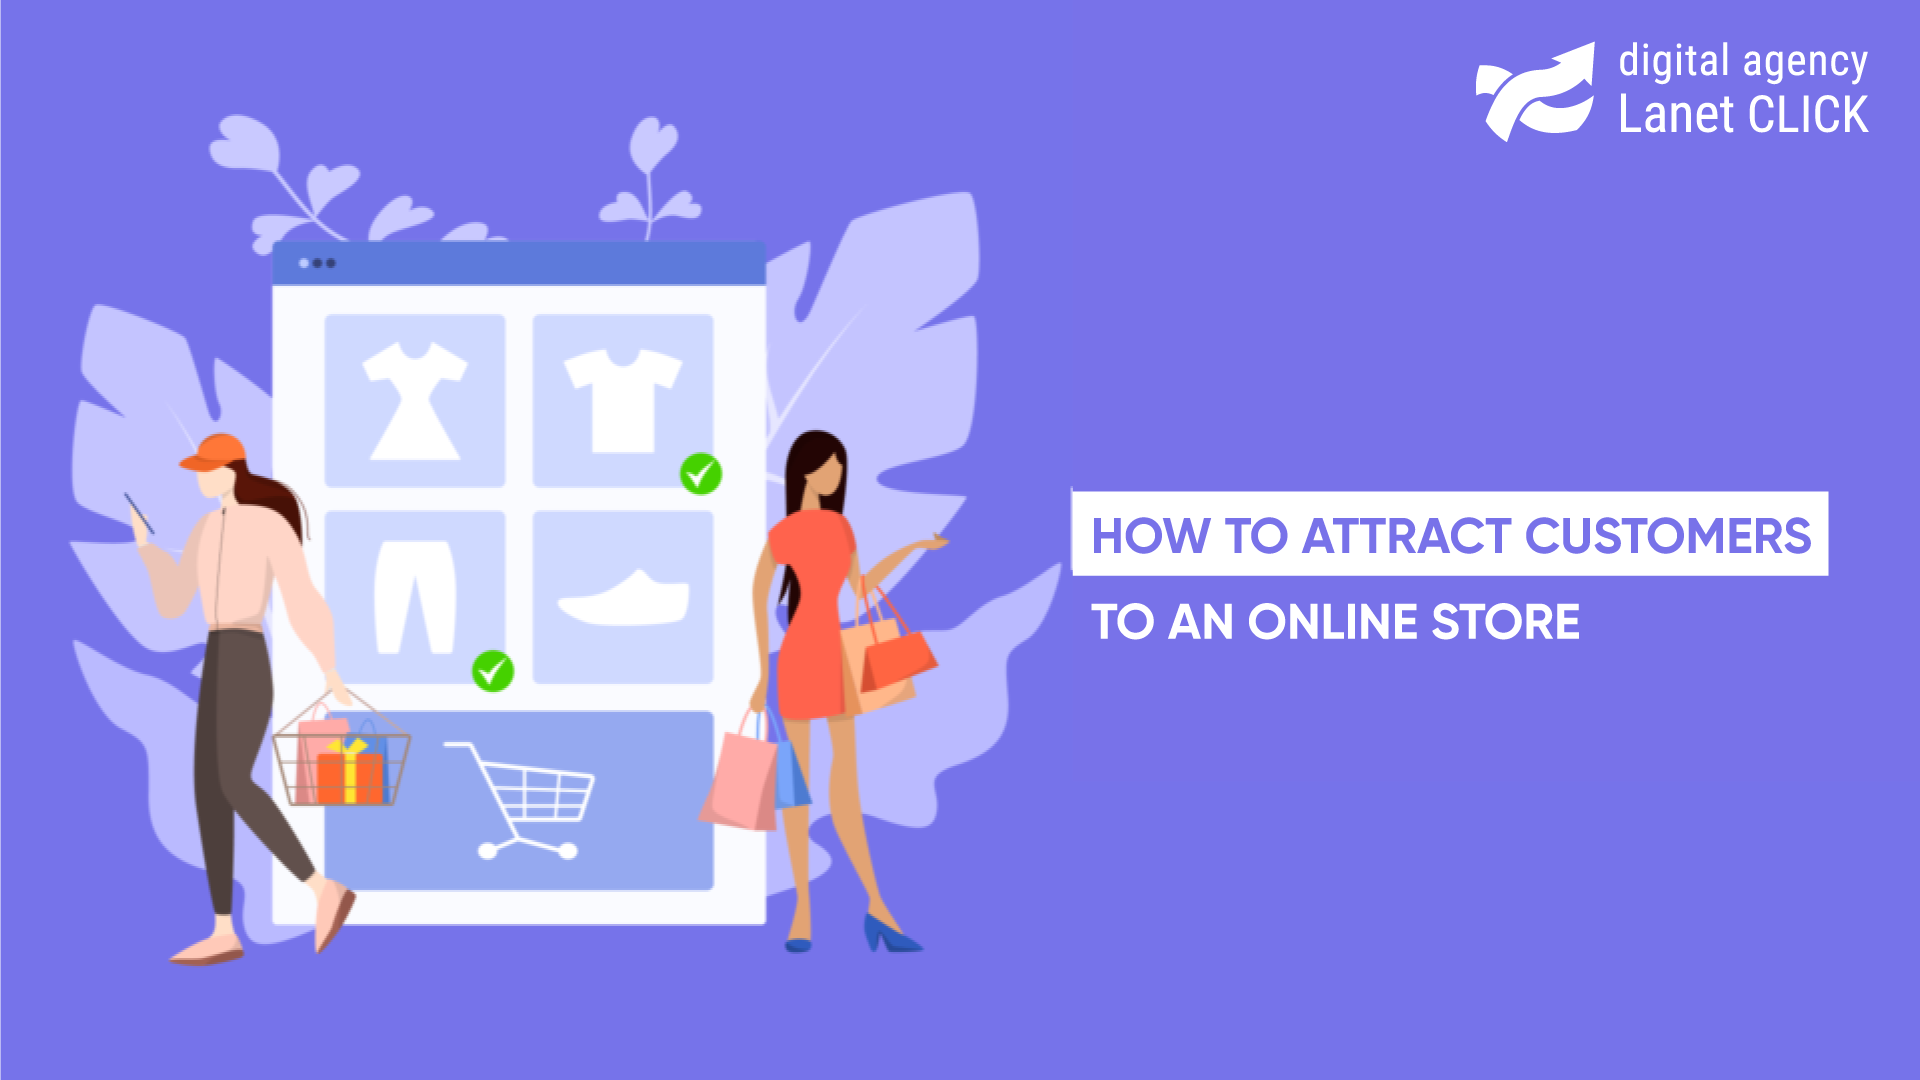 How to attract customers to an online store